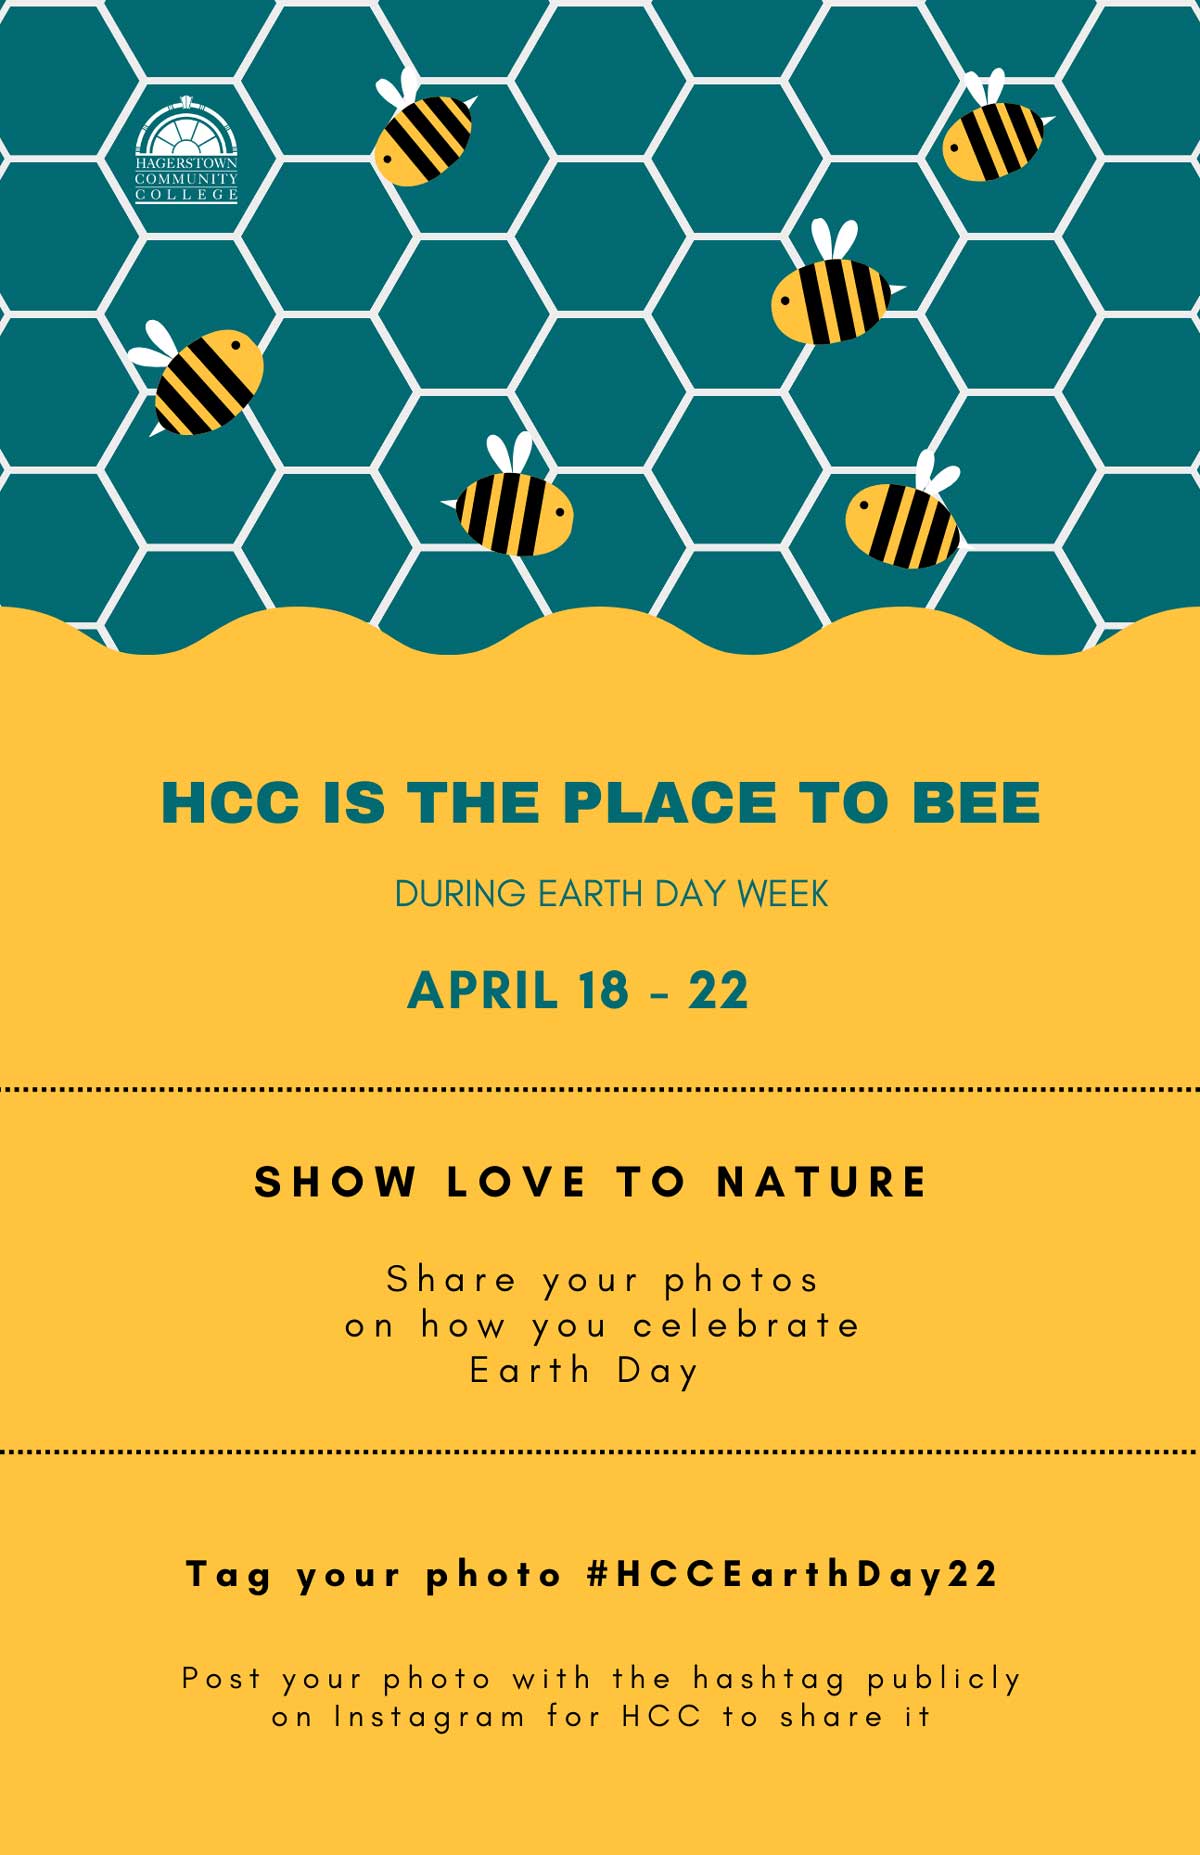 HCC is the Place to Bee. For more information on HCC's 2022 Earth Day click here.